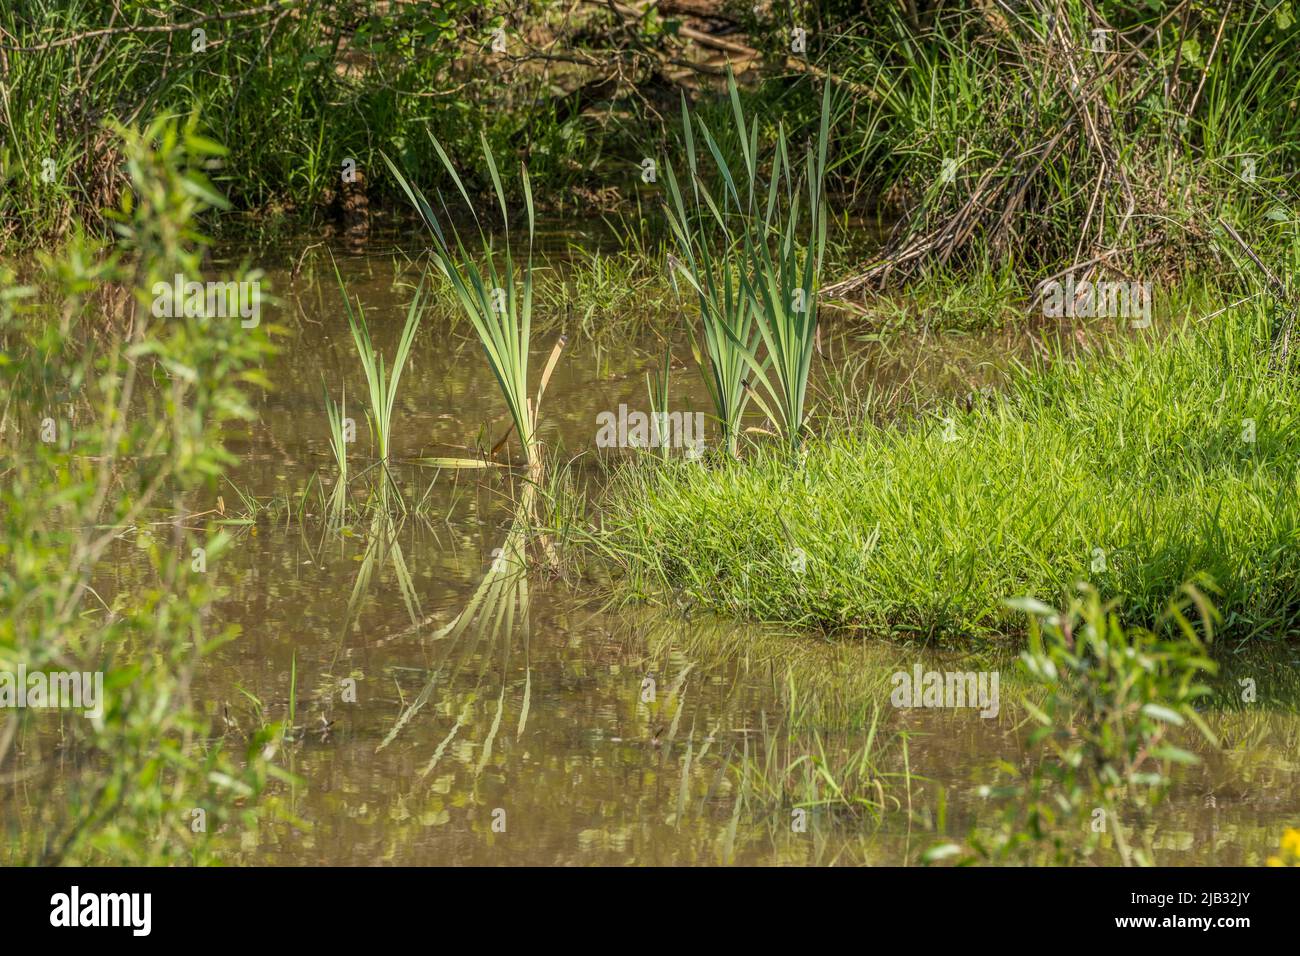 Cattails in the wetlands just starting to emerge in the shallow water on a sunny day in springtime Stock Photo